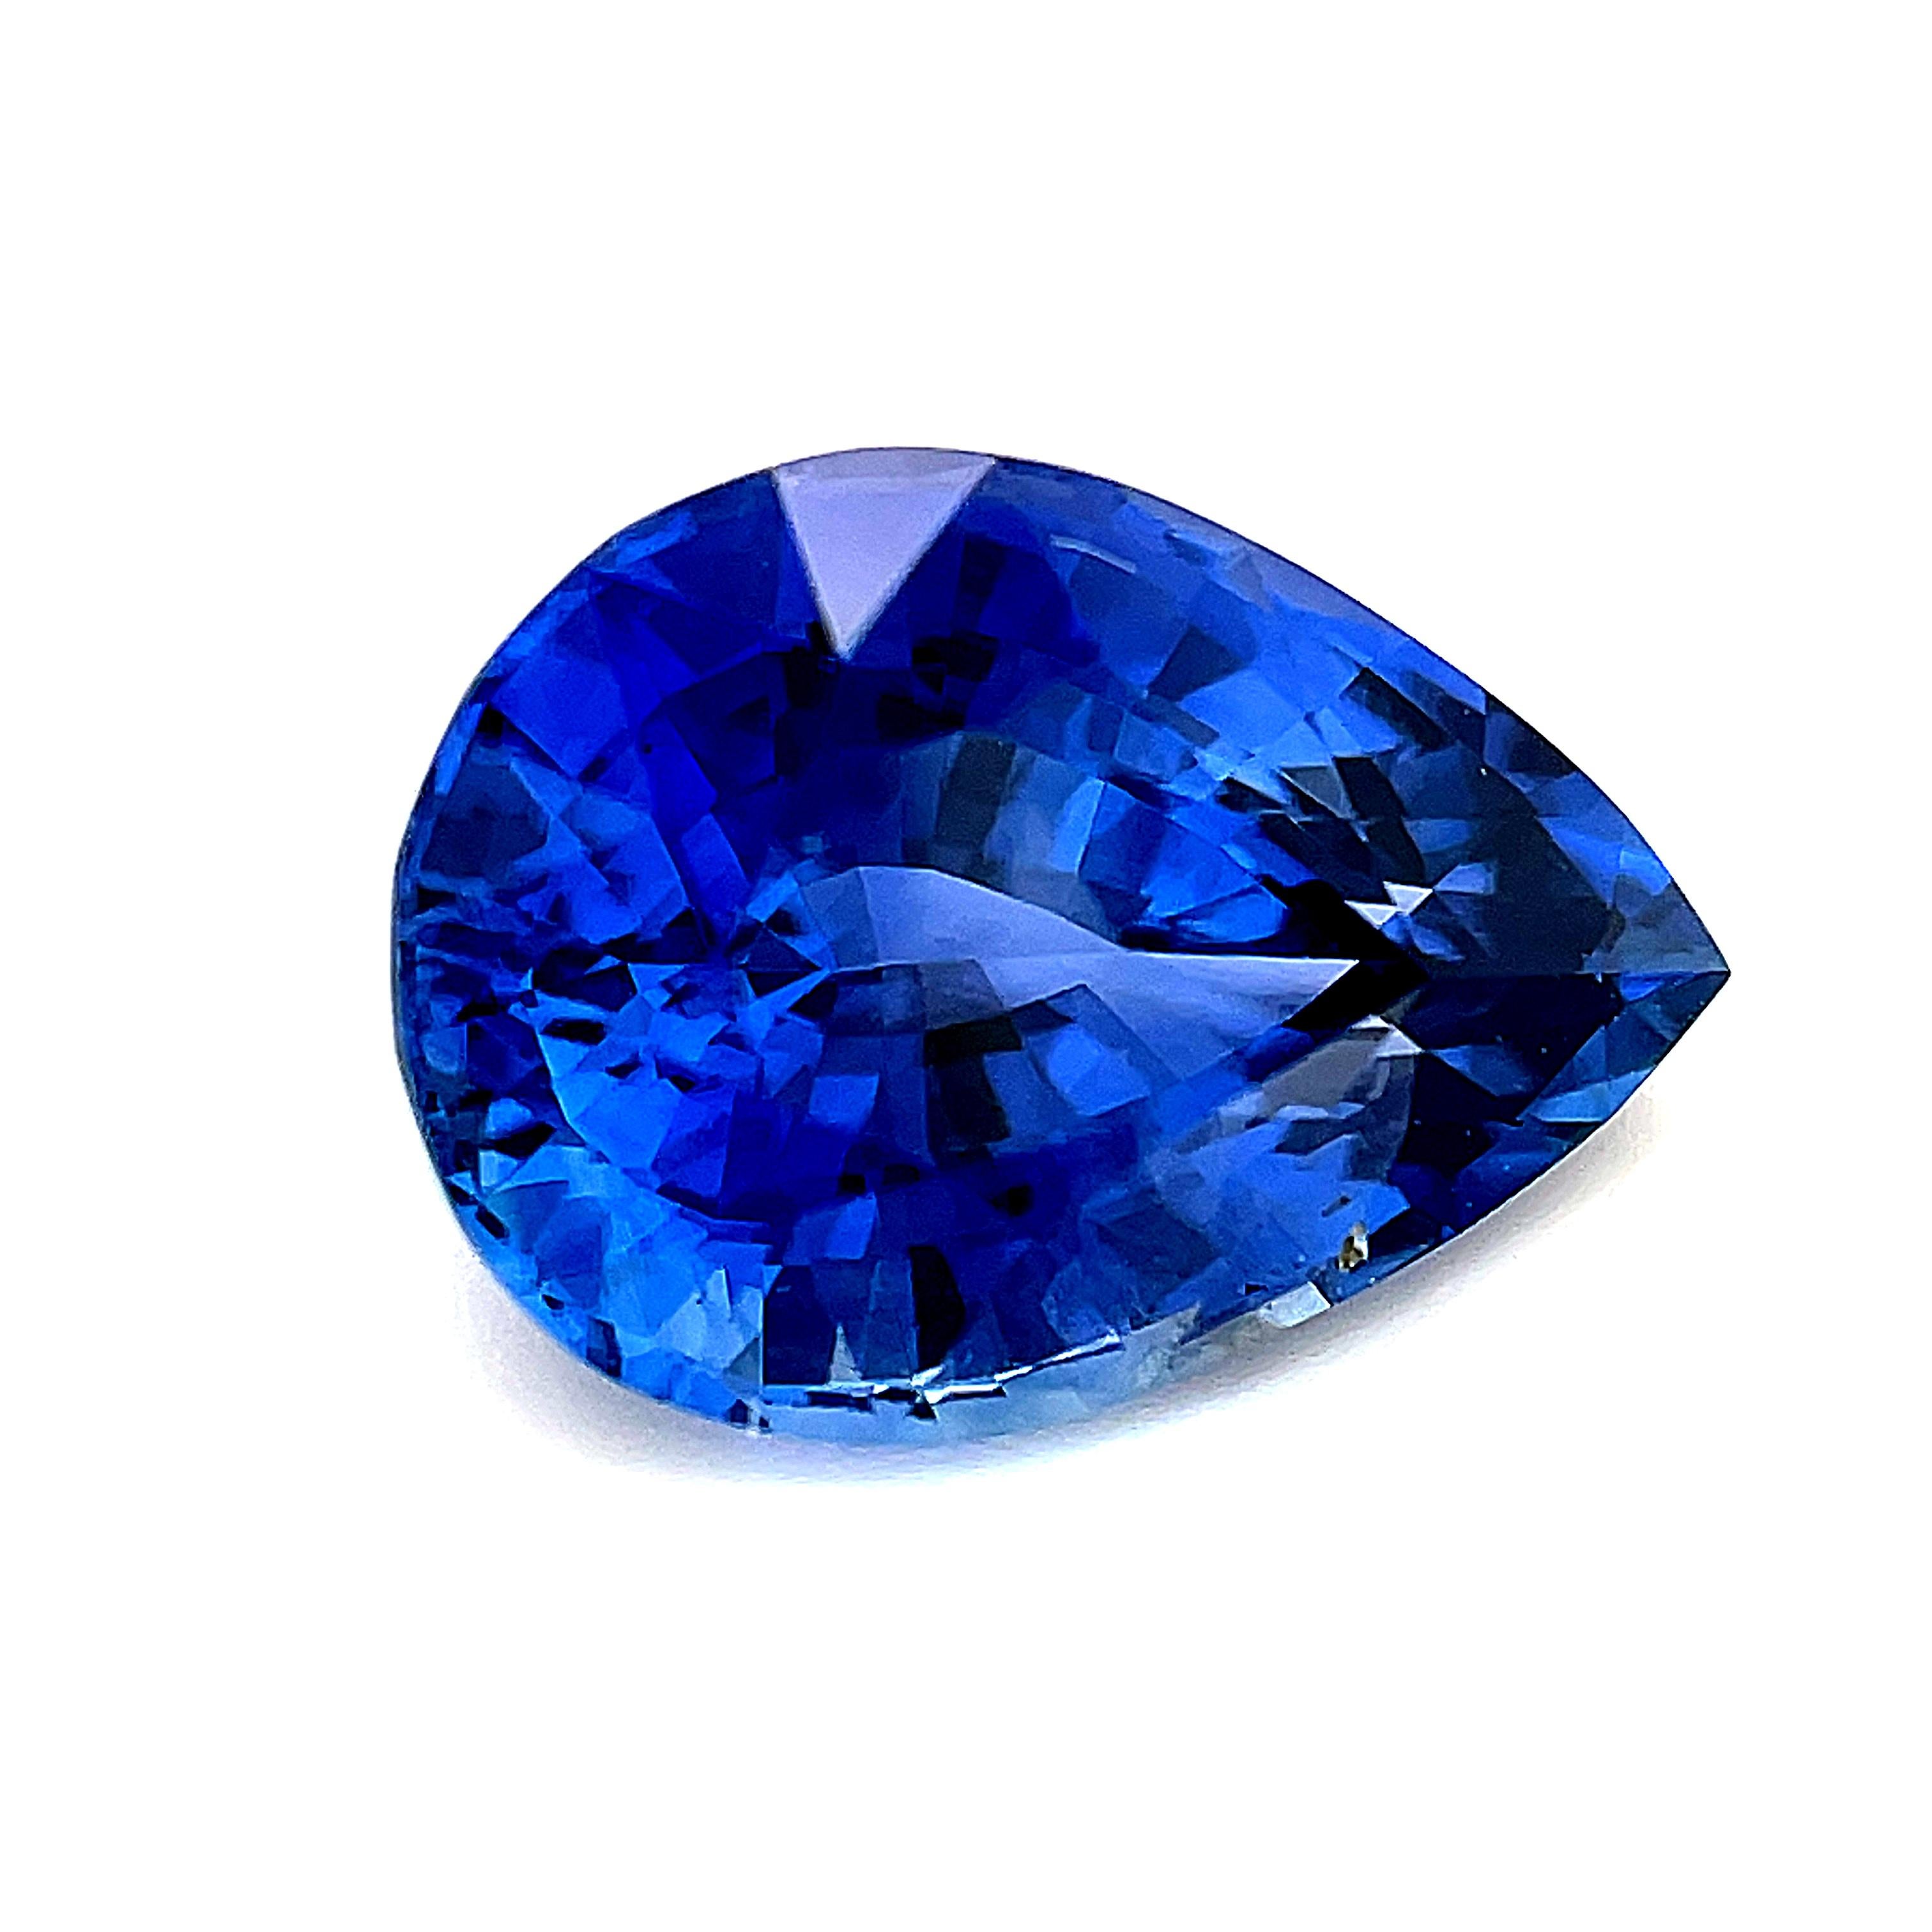 Artisan 4.18 Carat Unheated Natural Blue Sapphire Pear, Loose Gemstone, GIA Certified For Sale